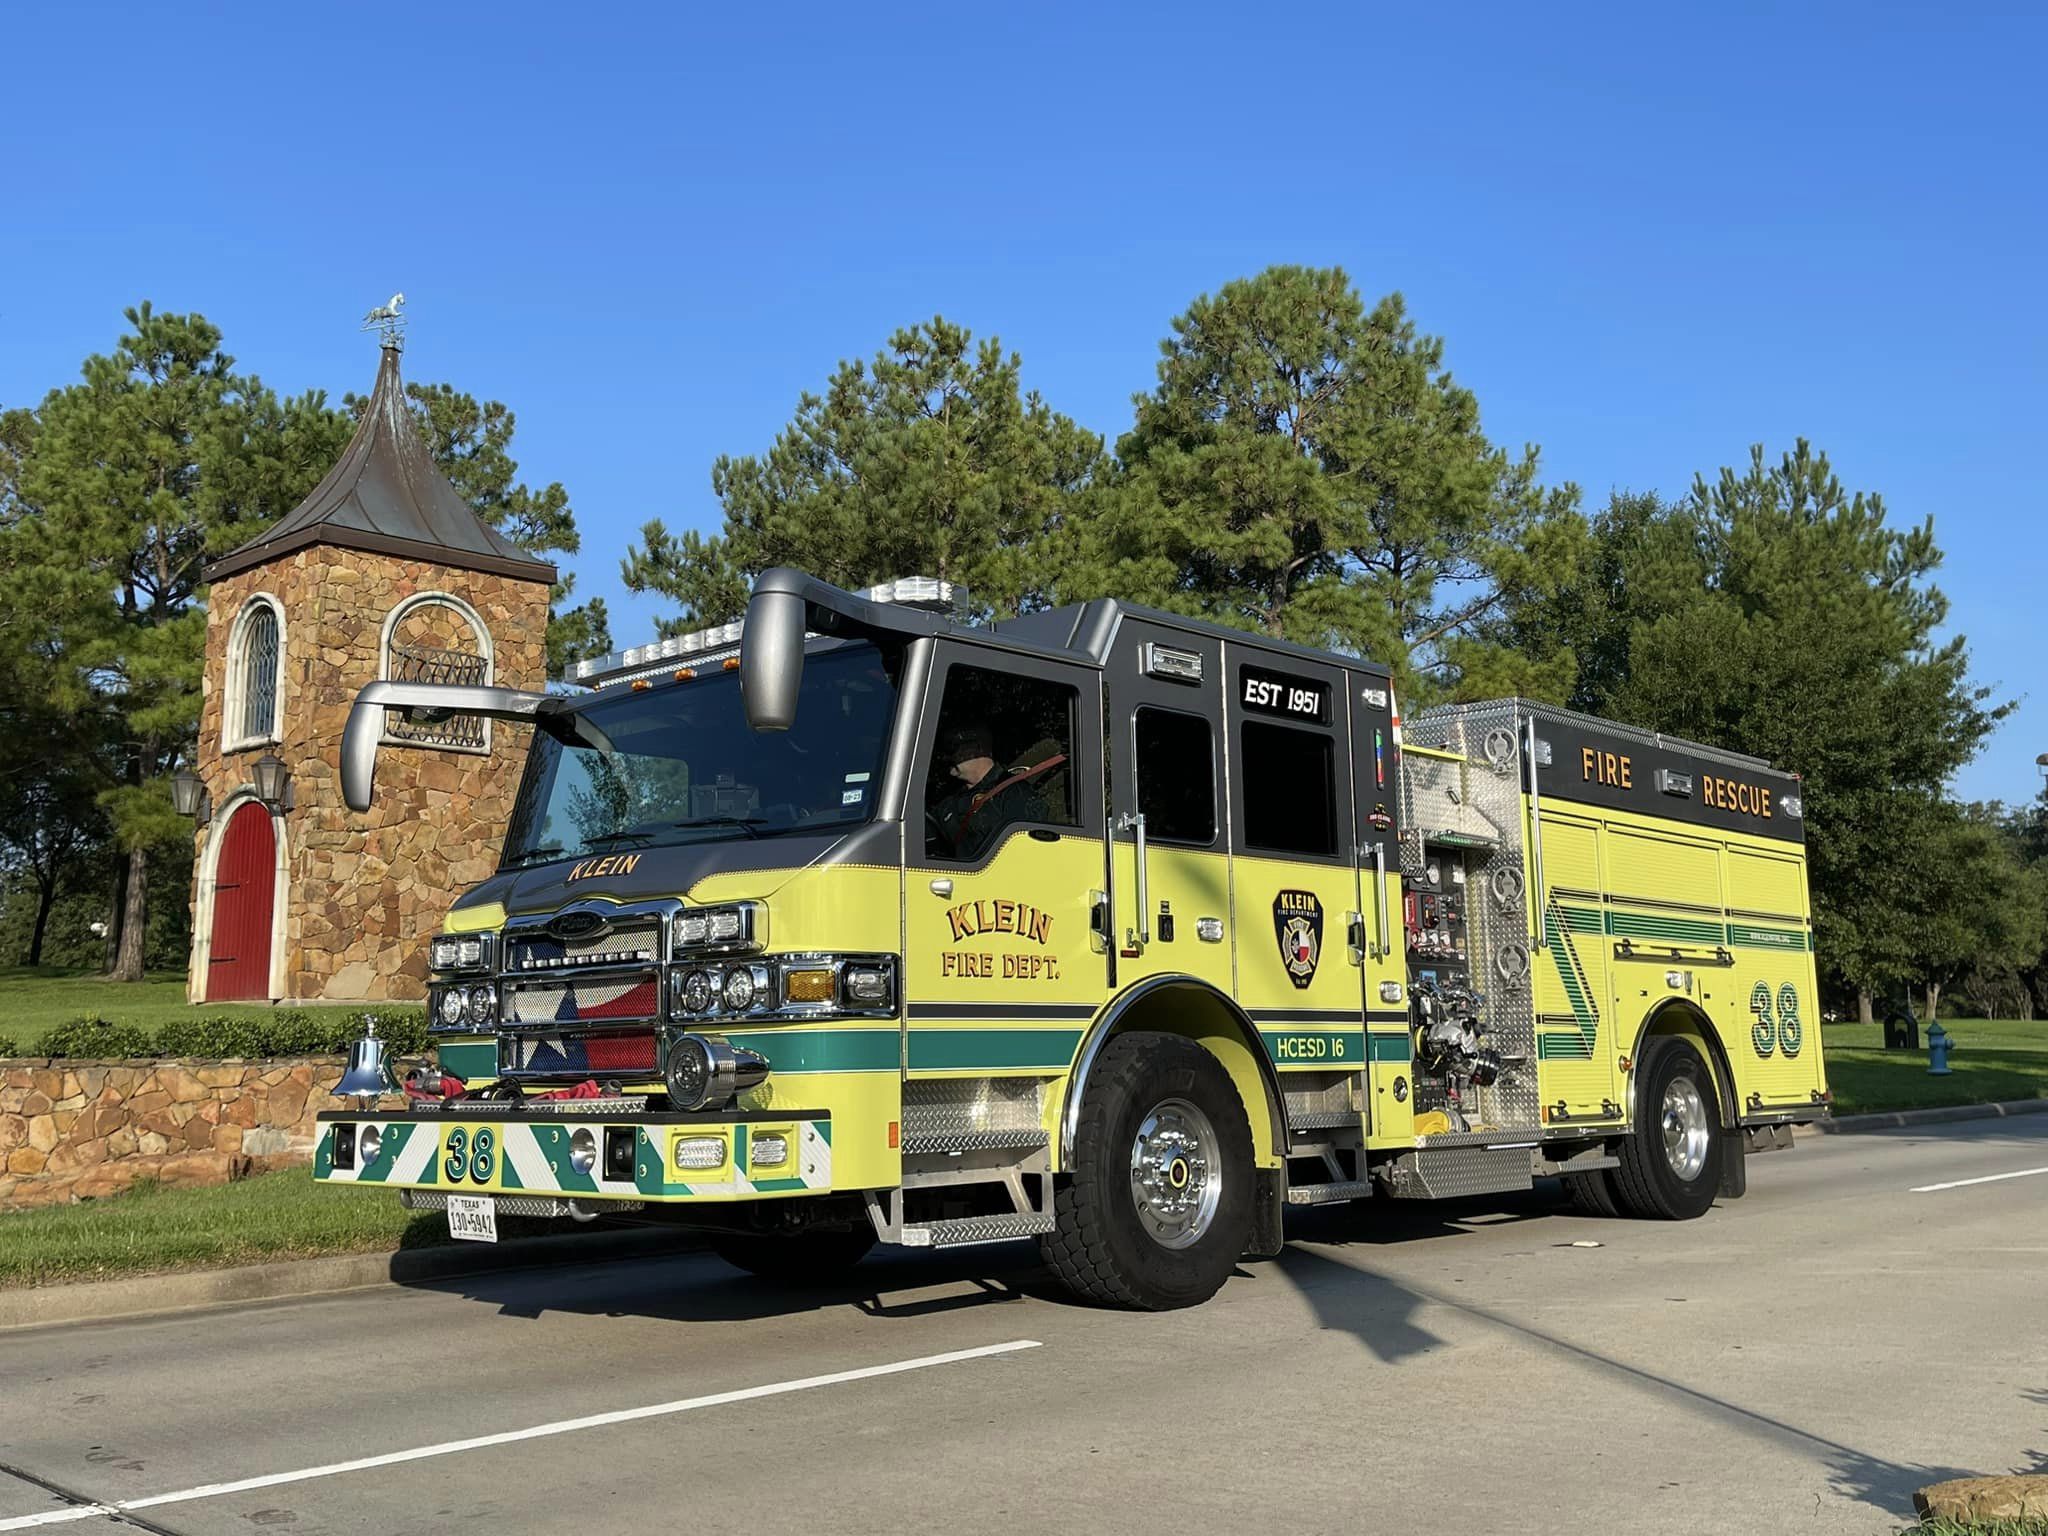 HCESD16/Klein Fire Hiring for Driver/Operator Positions